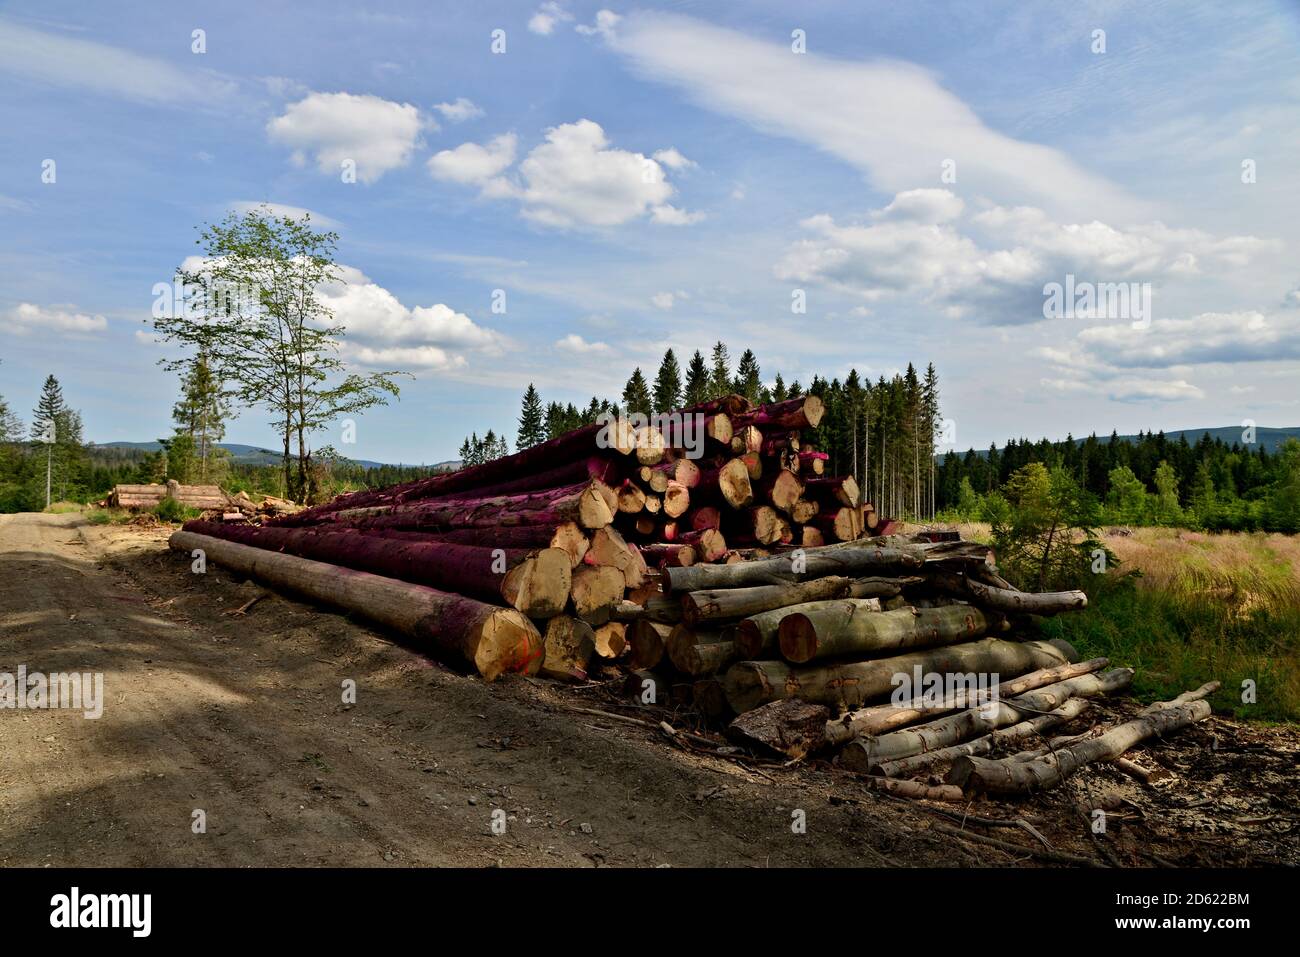 A pile of cut wood in the middle of a green meadow. Background with green trees and blue sky with white clouds. Bark beetle calamity in mountain fores Stock Photo